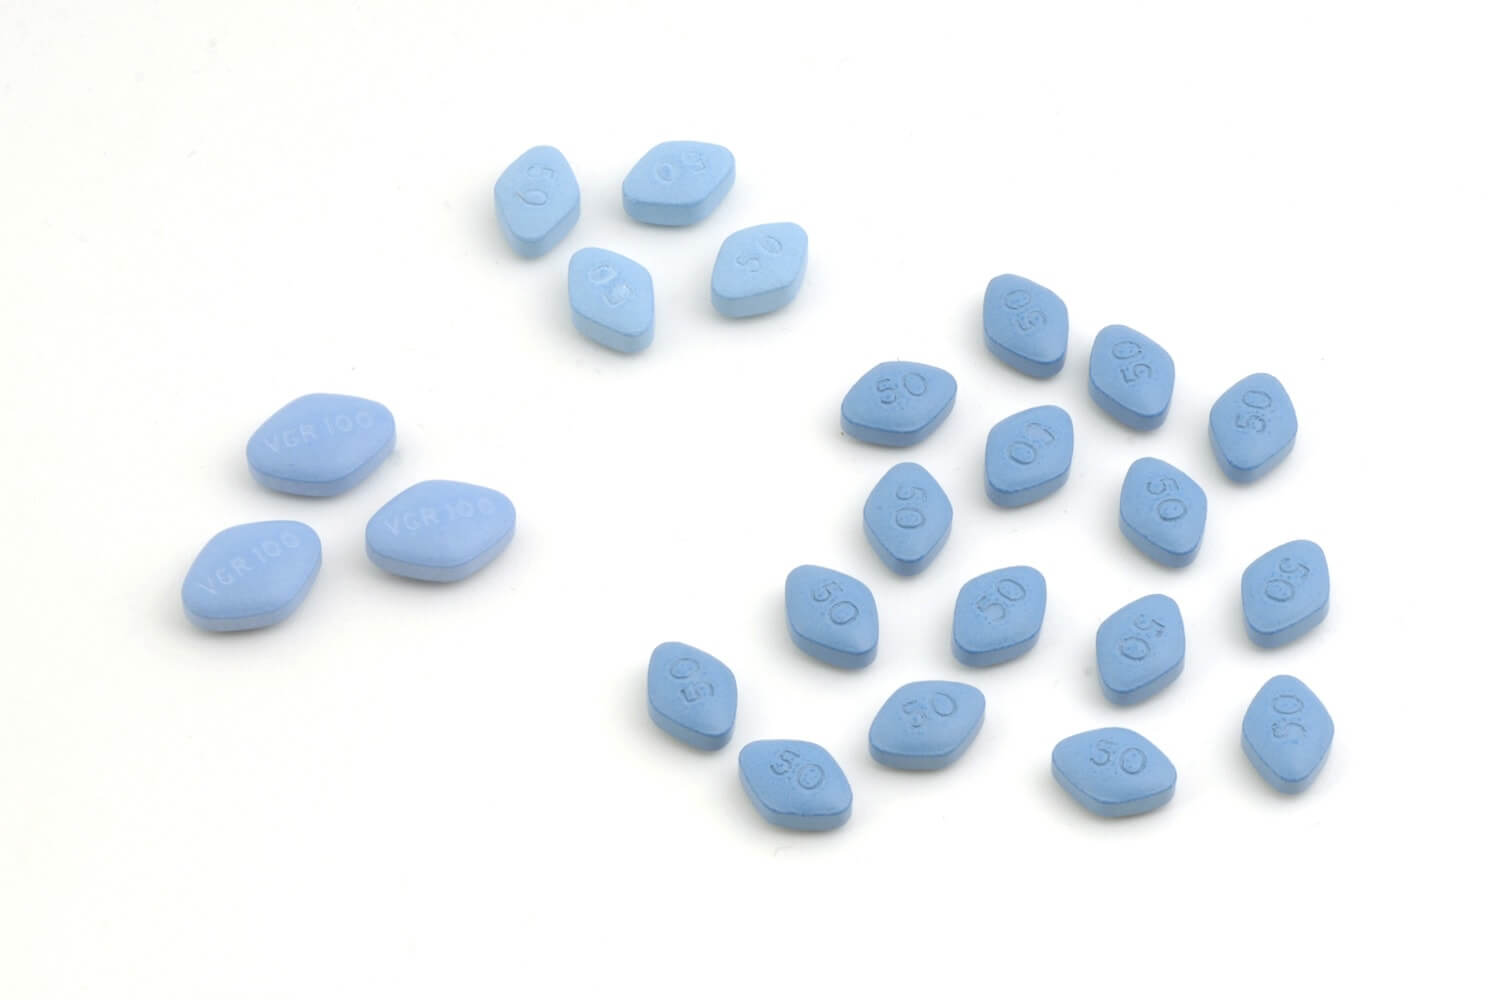 Viagra Dosages Available Online in My Canadian Pharmacy